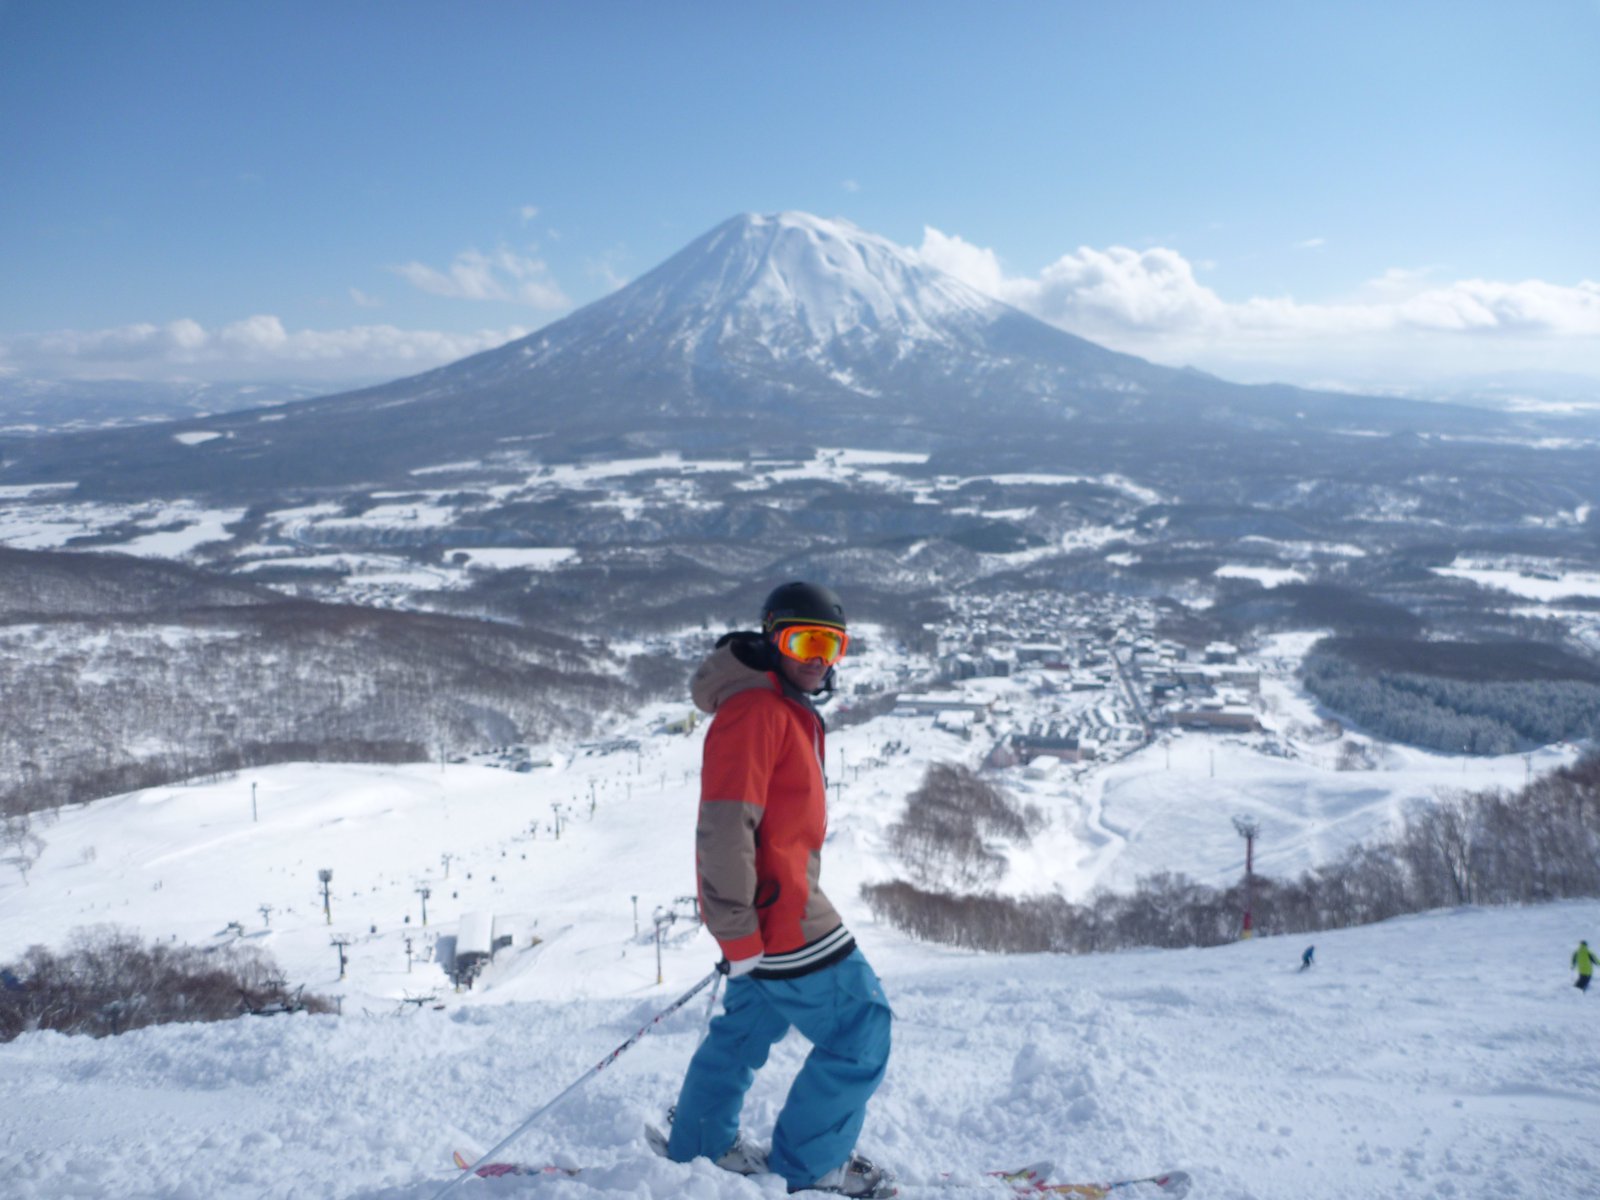 View of Mt Yotei from the Niseko slopes